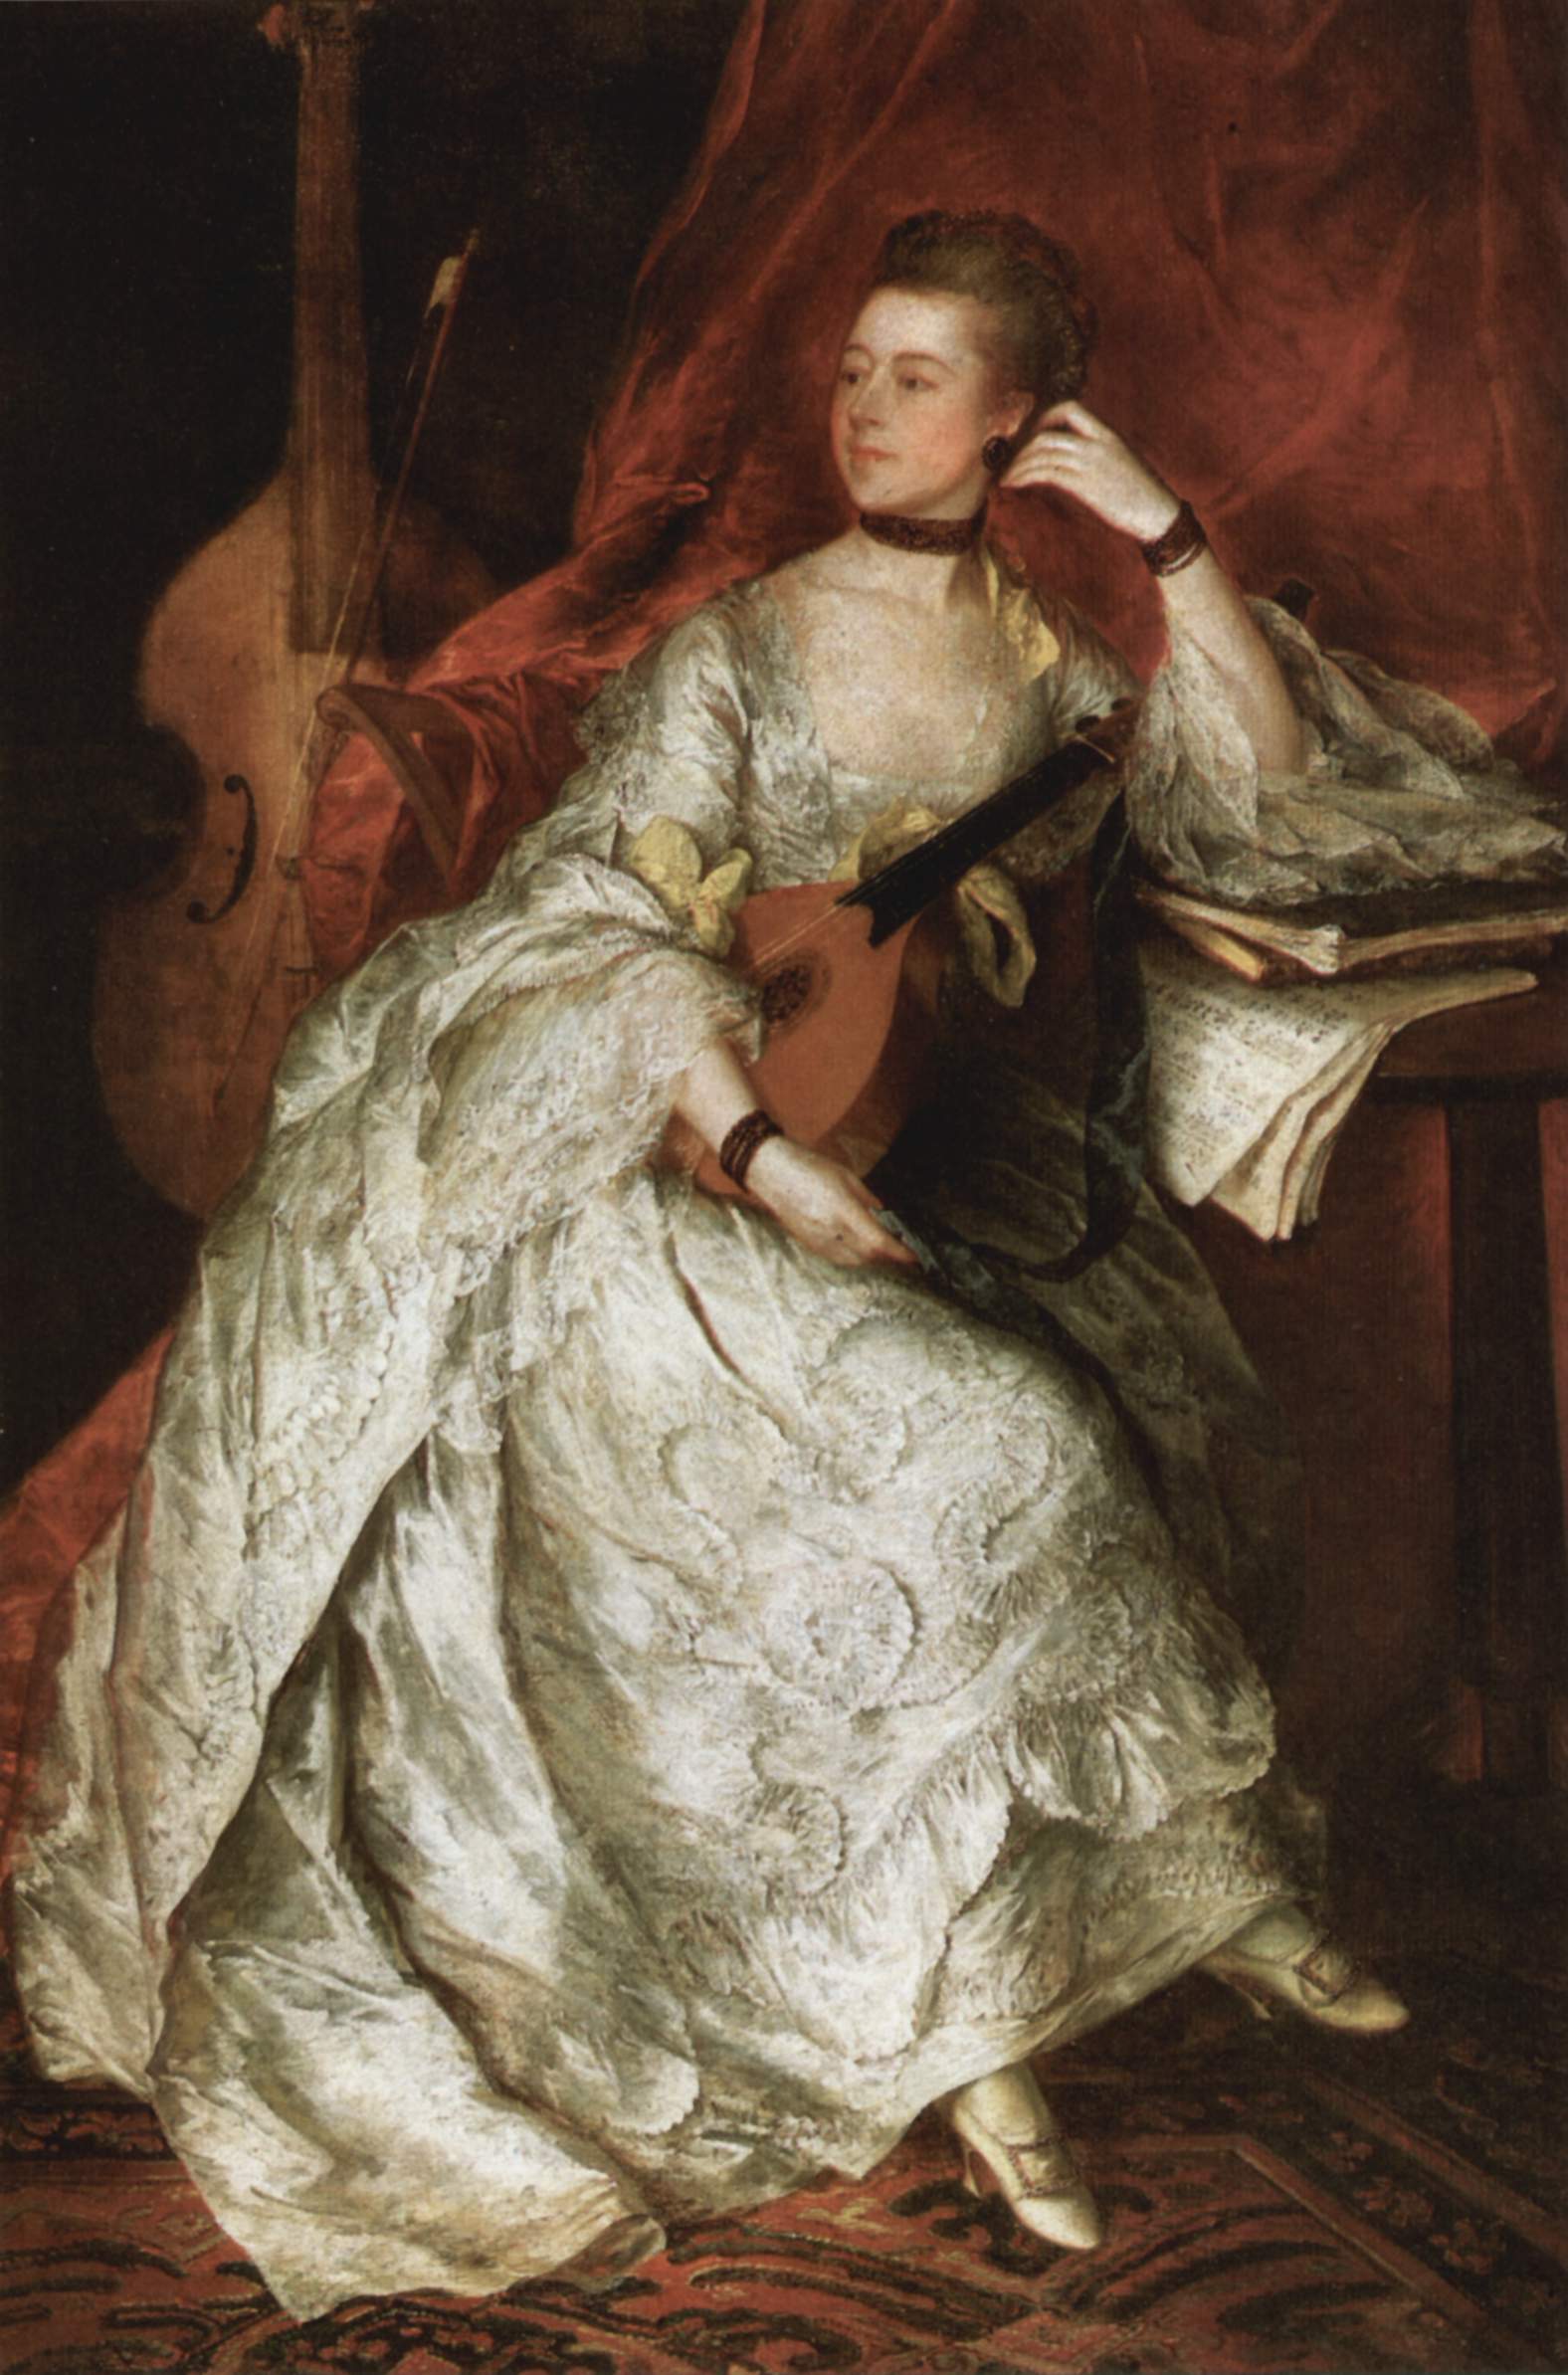 http://uploads0.wikiart.org/images/thomas-gainsborough/portrait-of-ann-ford-later-mrs-thicknesse-1760.jpg